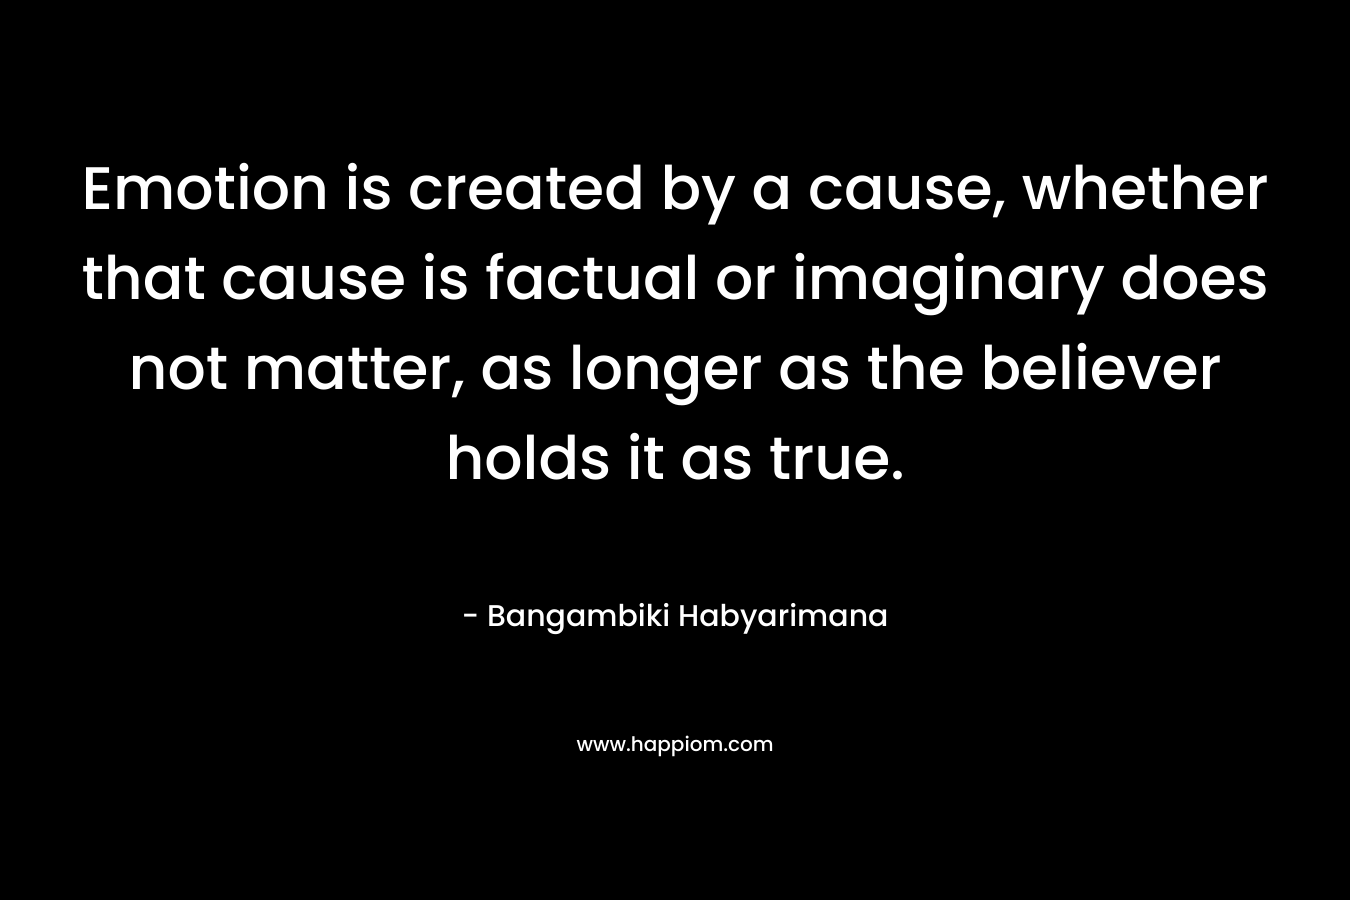 Emotion is created by a cause, whether that cause is factual or imaginary does not matter, as longer as the believer holds it as true.